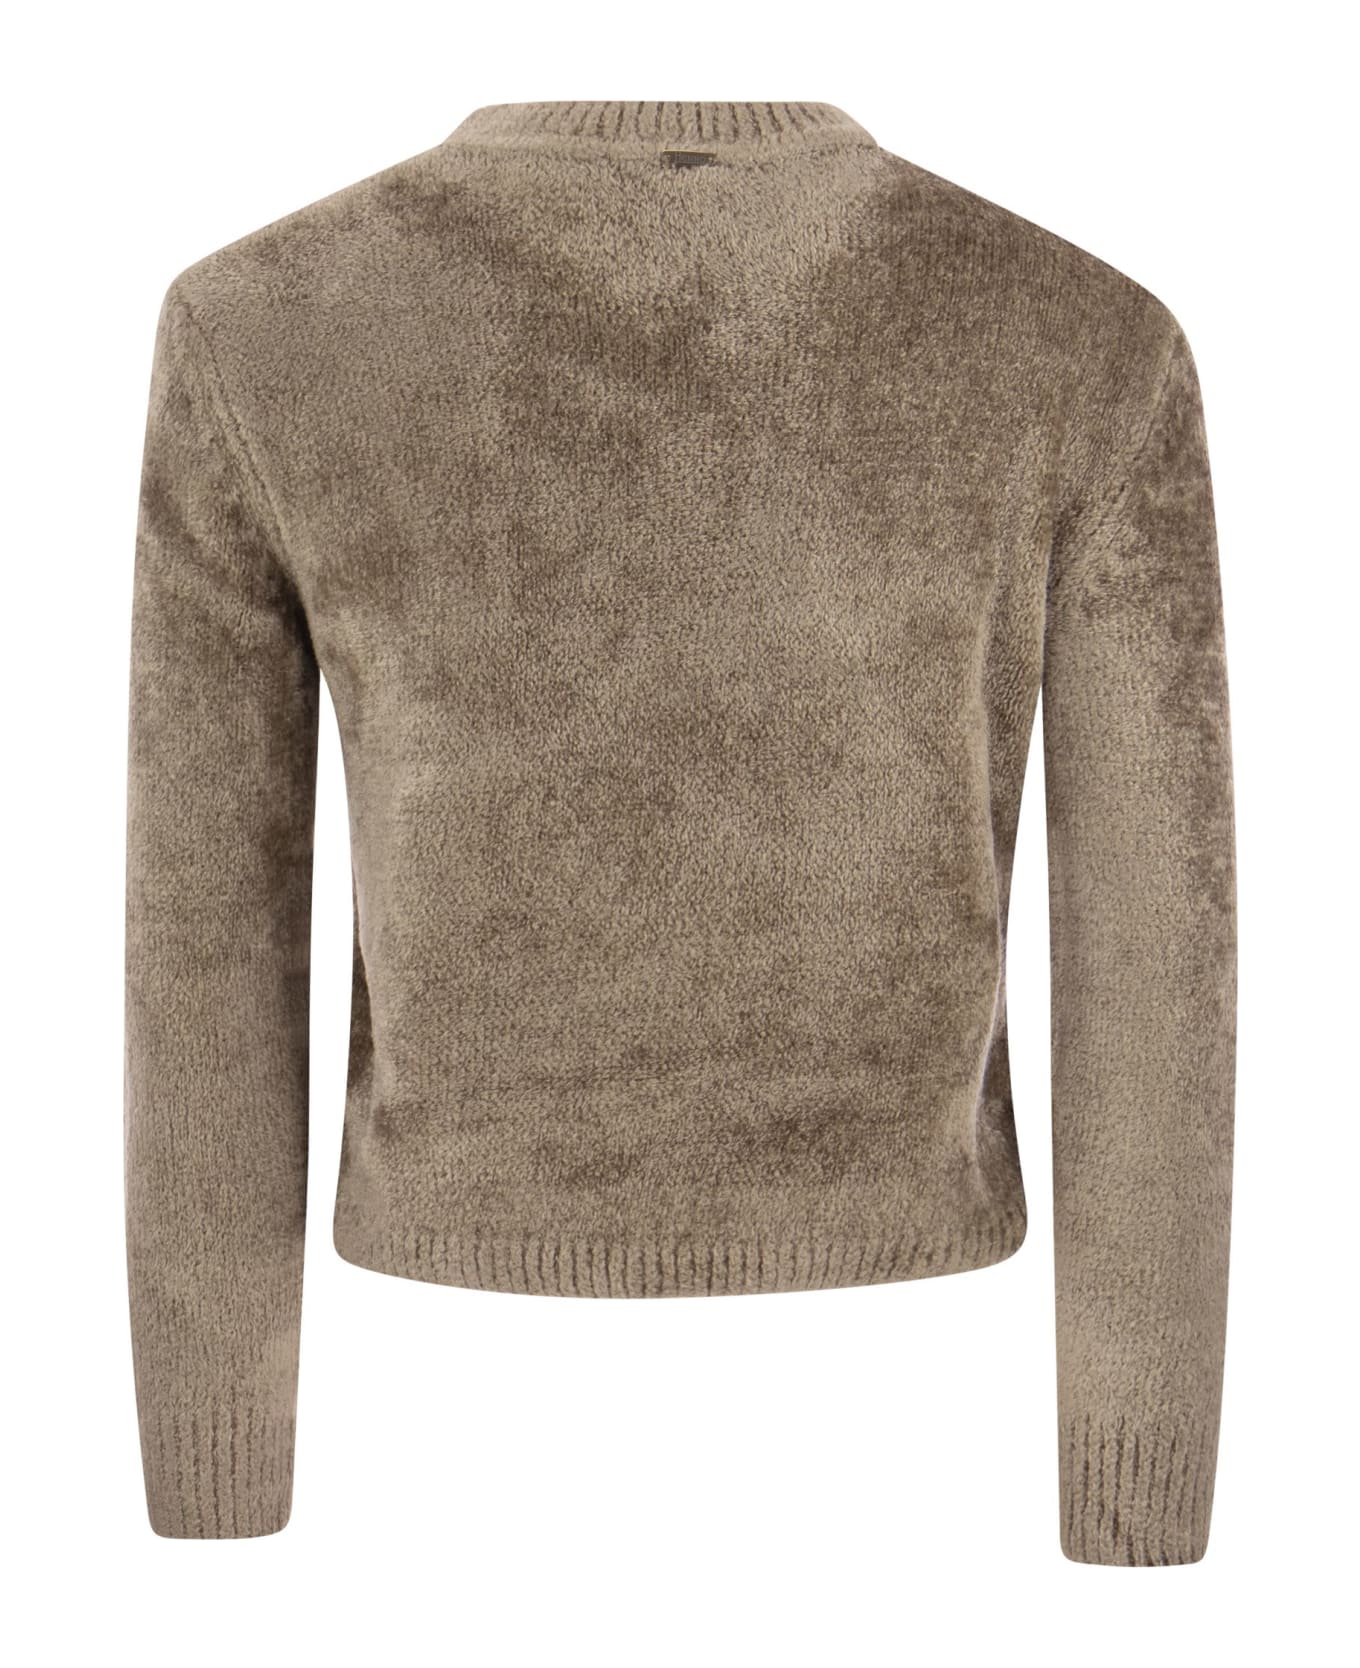 Herno Resort Pullover In Chenille Knit - Nude & Neutrals